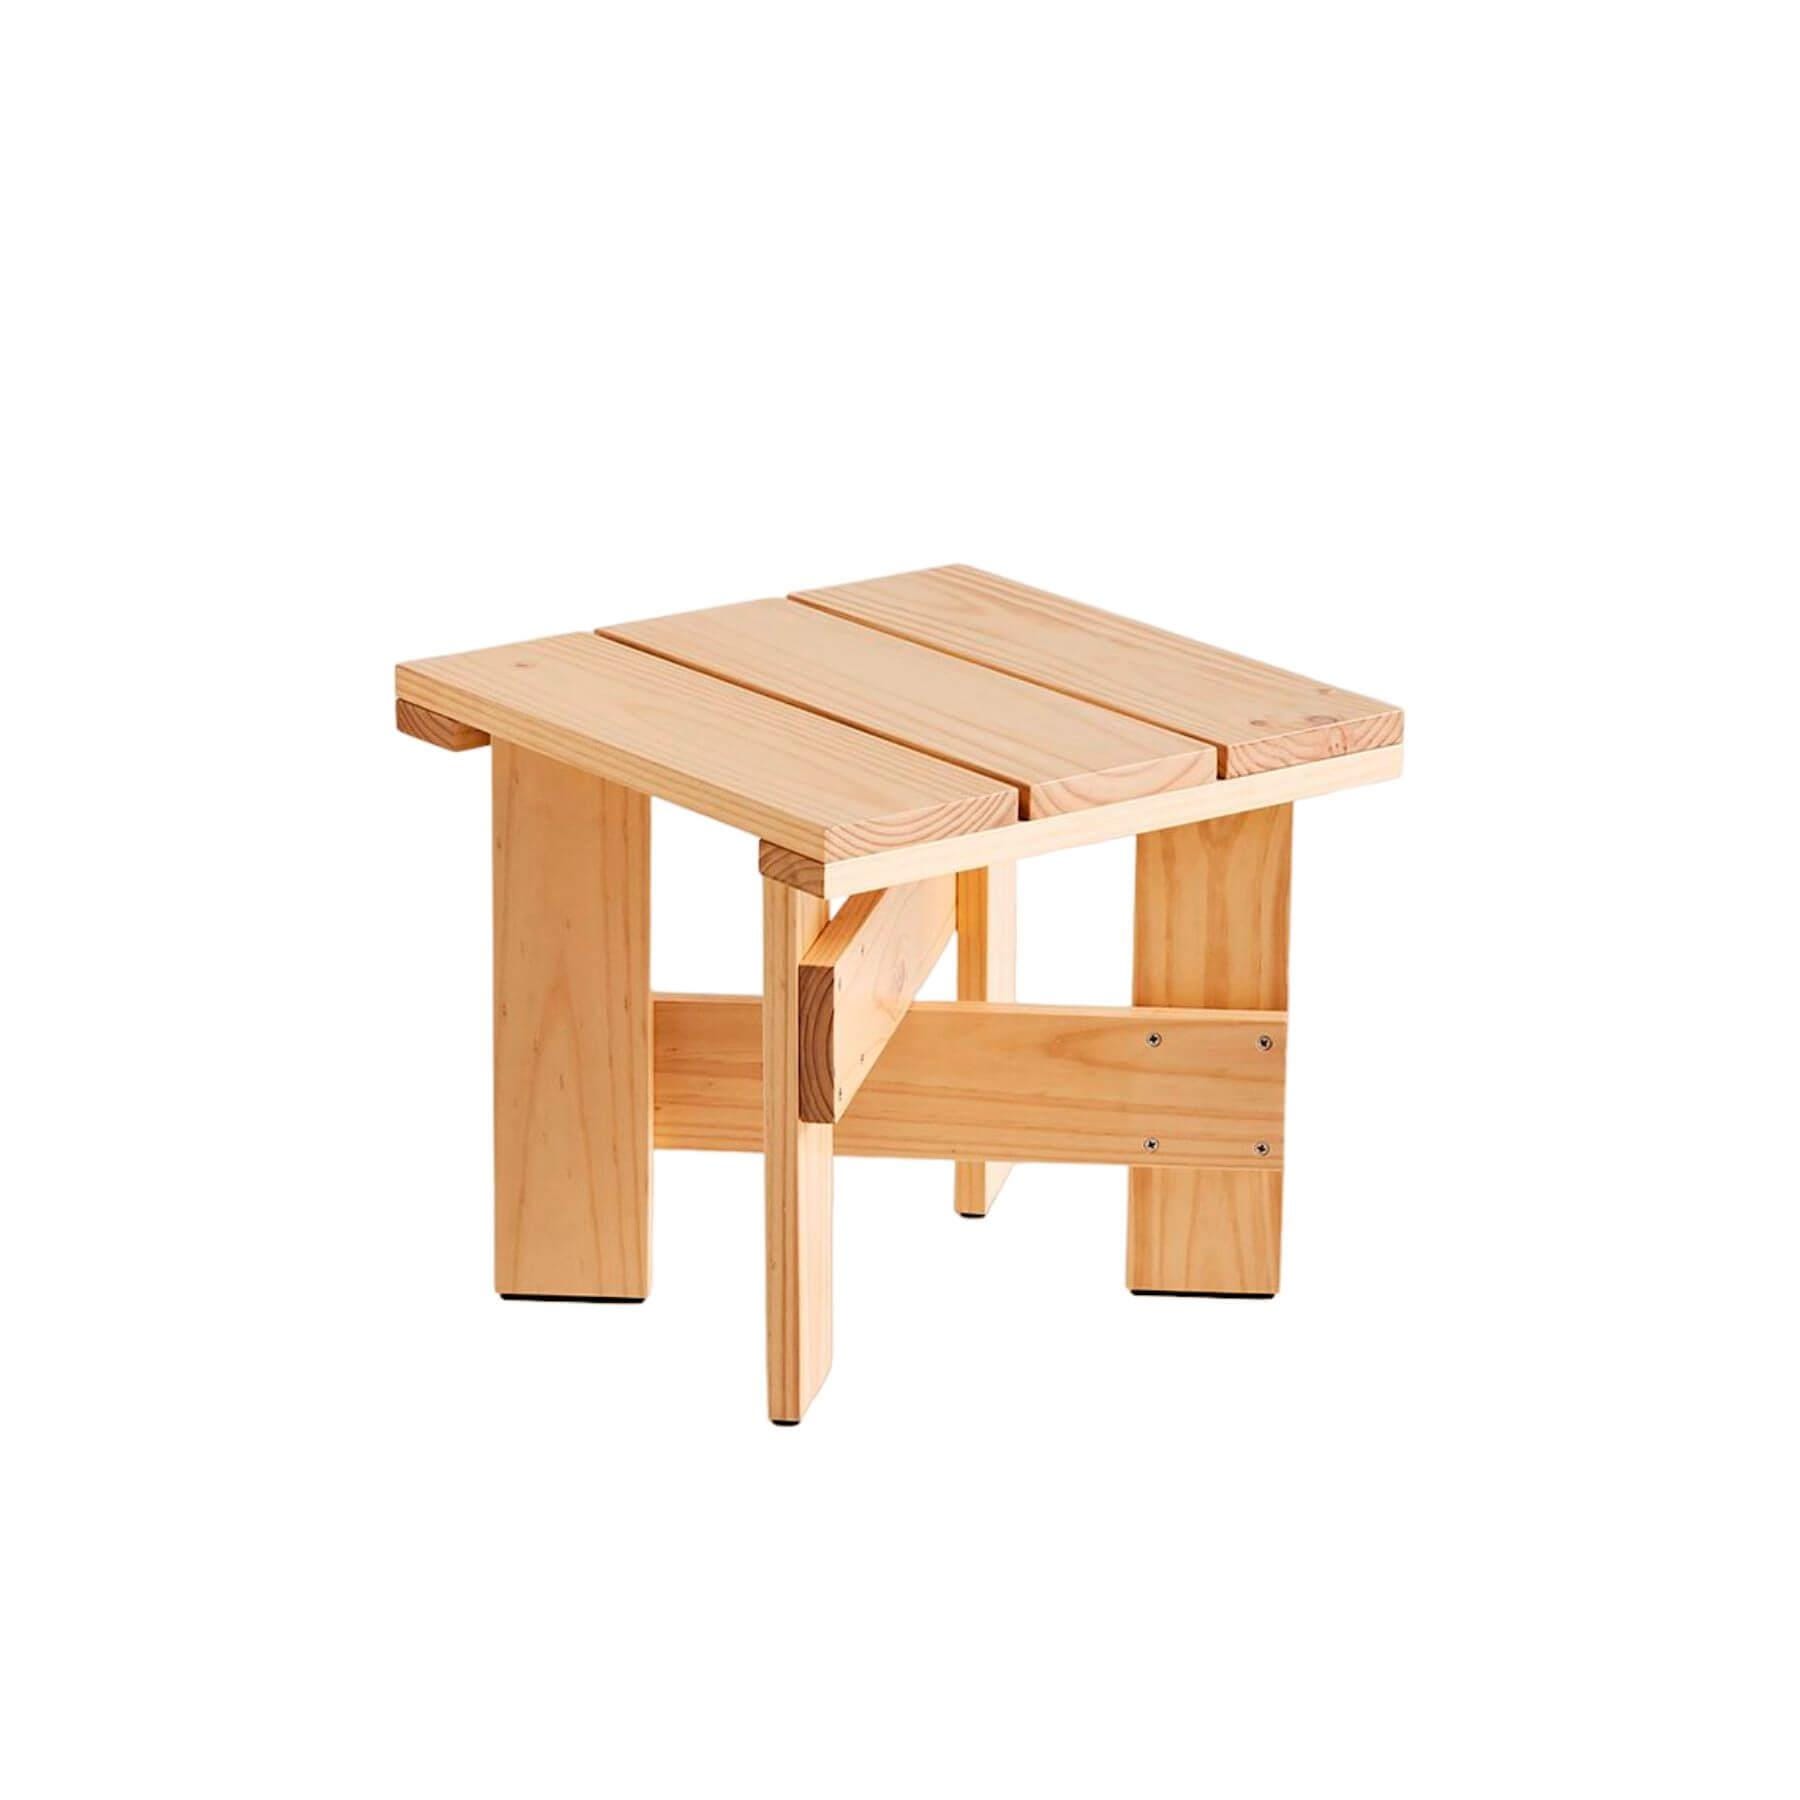 Hay Crate Low Table 45 X 45 Pinewood Light Wood Designer Furniture From Holloways Of Ludlow